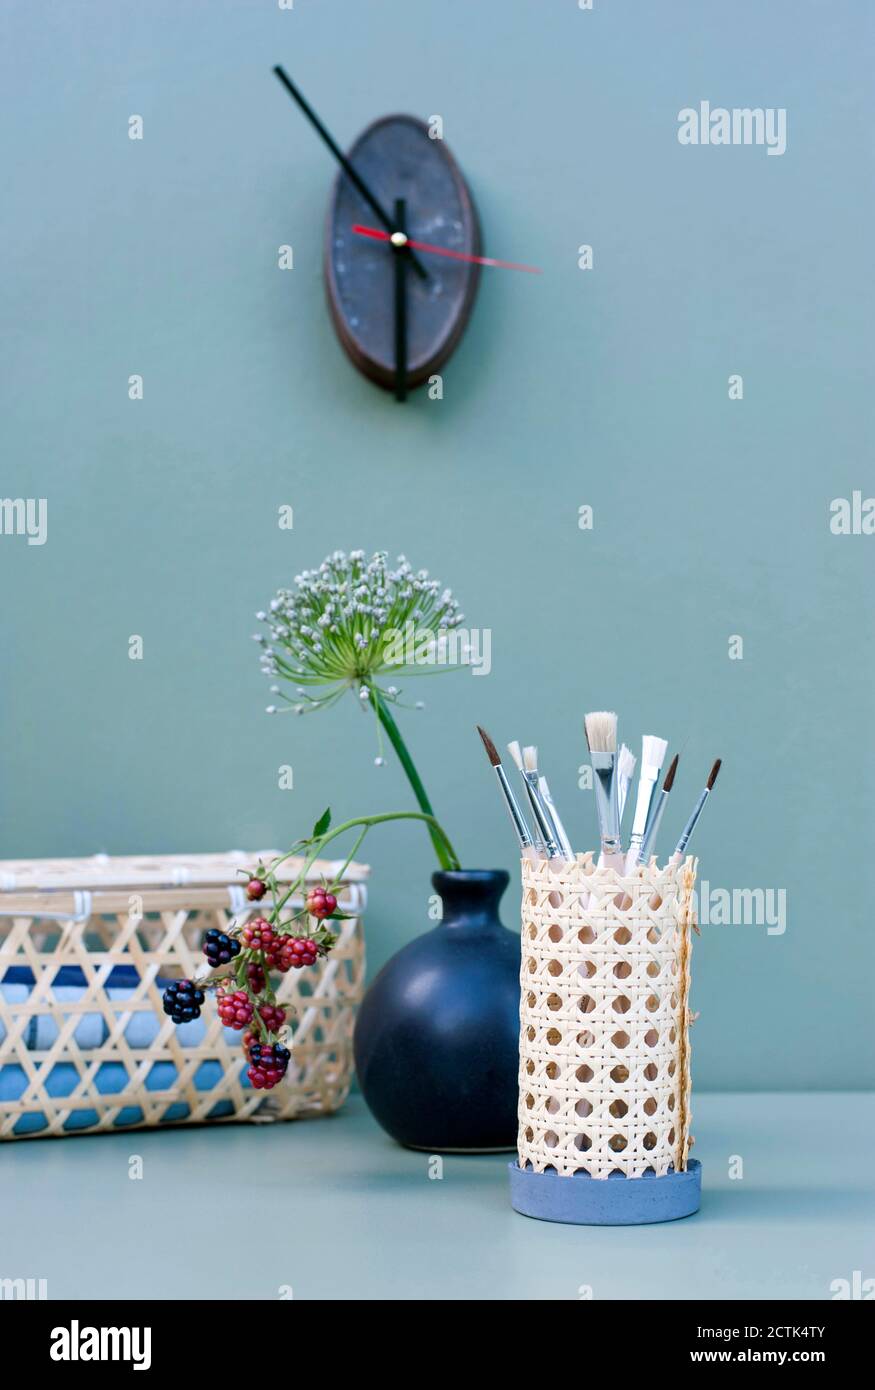 Vase with flowers and DIY rattan desk organizer with paintbrushes Stock Photo